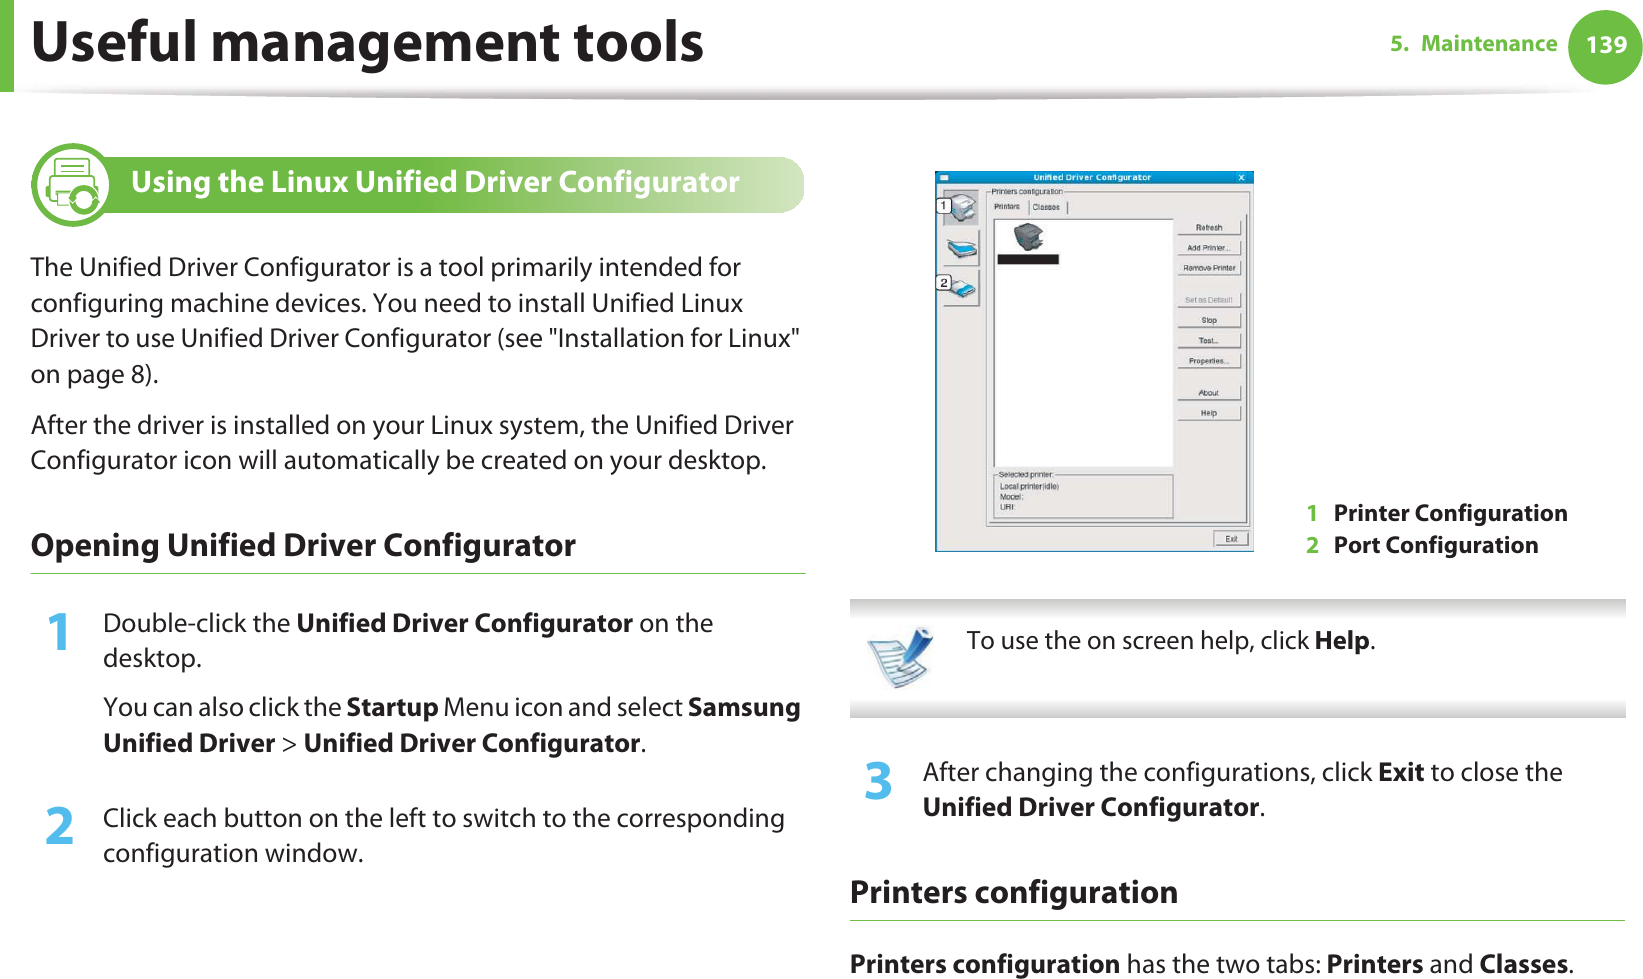 Useful management tools 1395. Maintenance12 Using the Linux Unified Driver ConfiguratorThe Unified Driver Configurator is a tool primarily intended for configuring machine devices. You need to install Unified Linux Driver to use Unified Driver Configurator (see &quot;Installation for Linux&quot; on page 8).After the driver is installed on your Linux system, the Unified Driver Configurator icon will automatically be created on your desktop.Opening Unified Driver Configurator1Double-click the Unified Driver Configurator on the desktop.You can also click the Startup Menu icon and select Samsung Unified Driver &gt; Unified Driver Configurator.2  Click each button on the left to switch to the corresponding configuration window.    To use the on screen help, click Help. 3  After changing the configurations, click Exit to close the Unified Driver Configurator.Printers configurationPrinters configuration has the two tabs: Printers and Classes.1Printer Configuration 2Port Configuration 